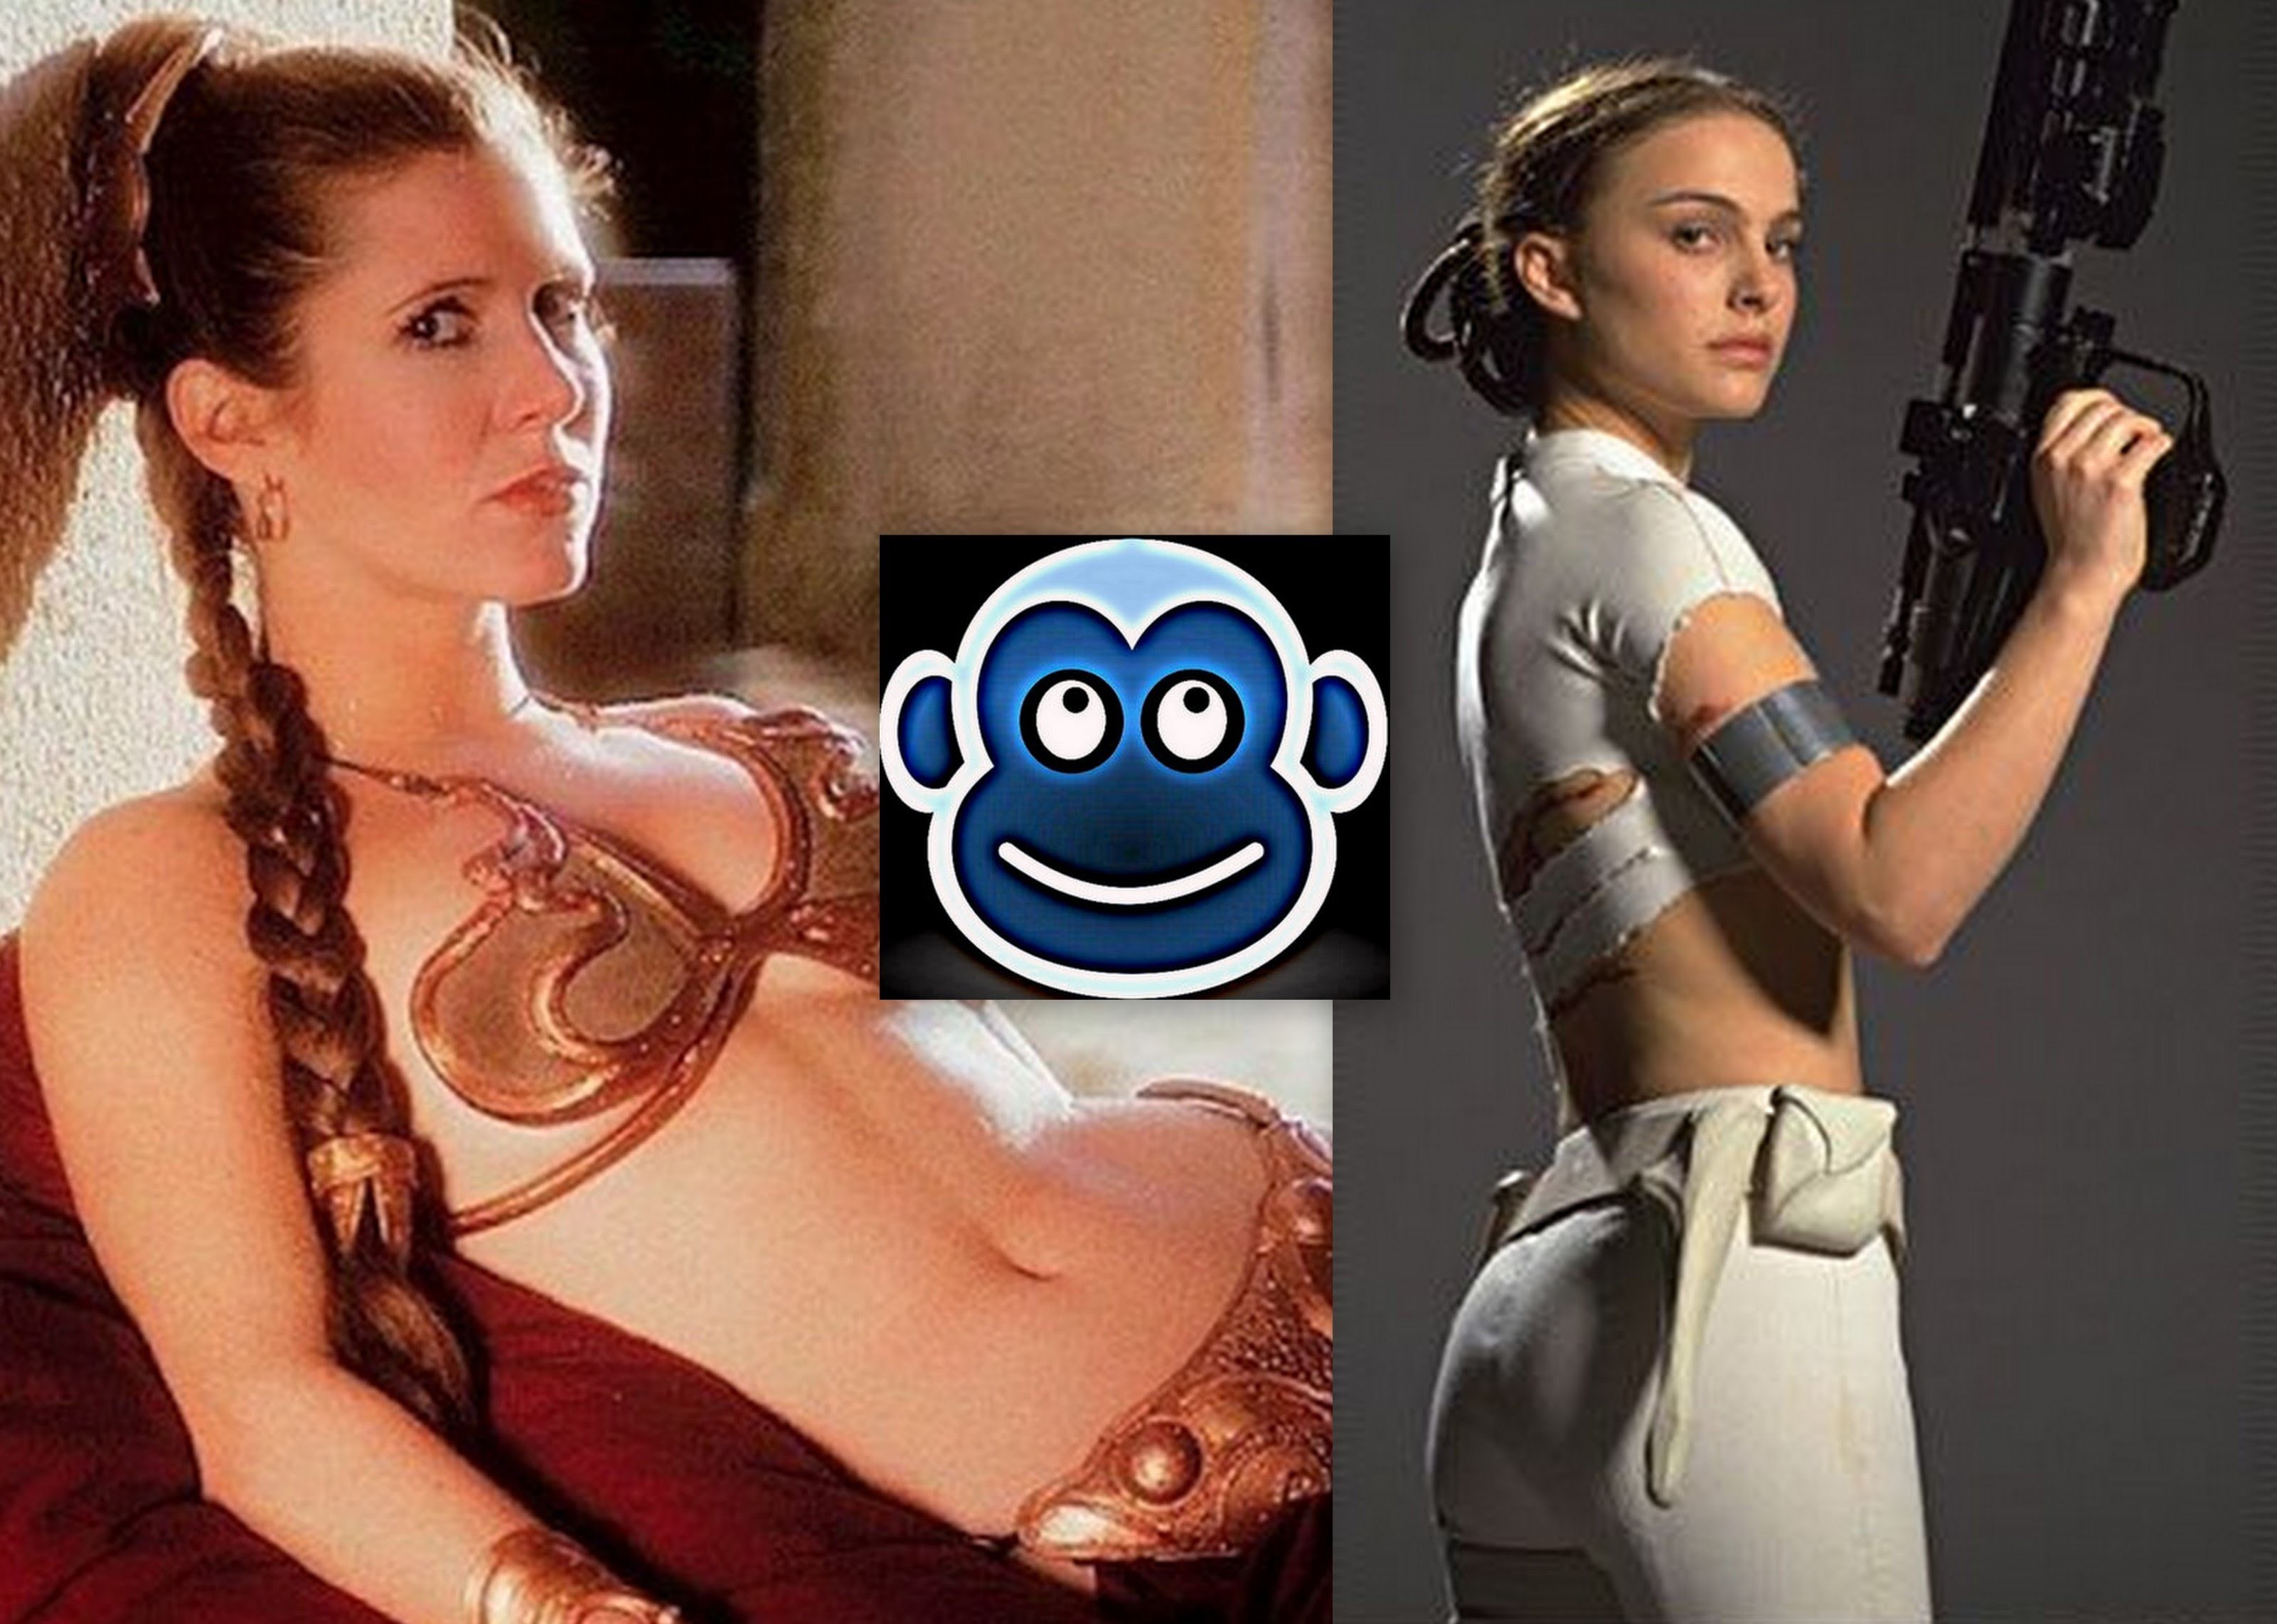 I think Padme was more interesting in what she did